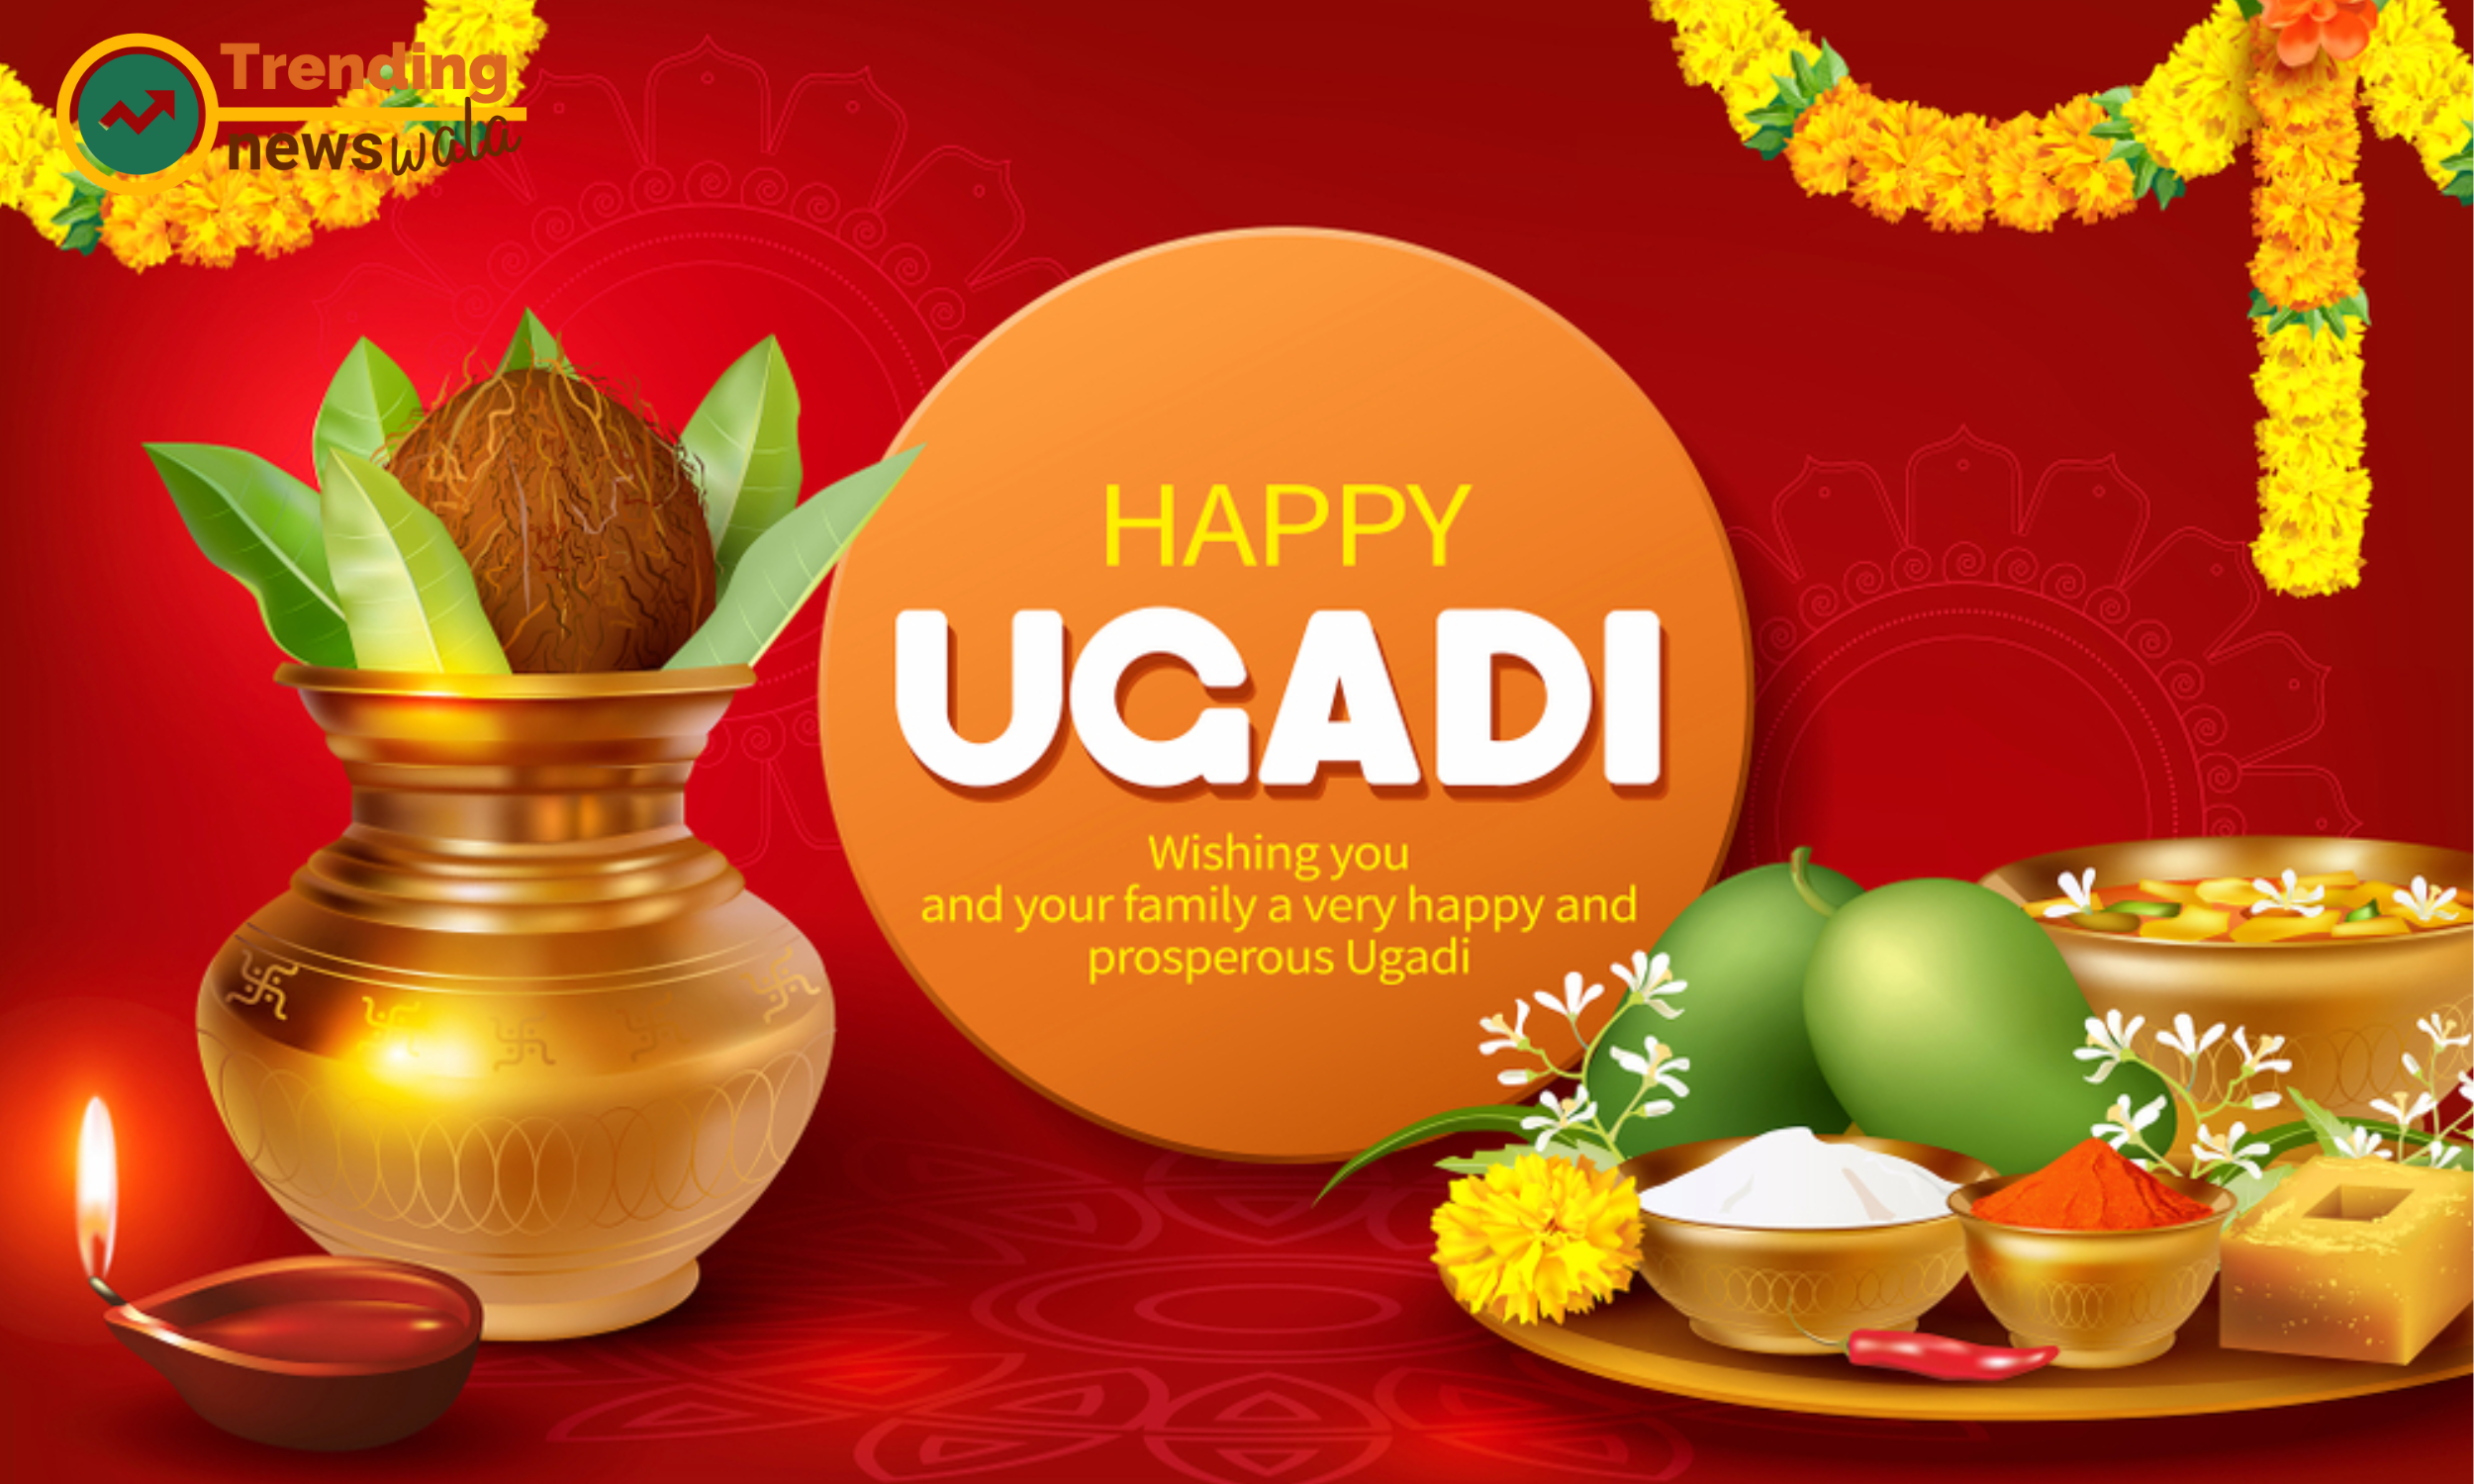 Ugadi feasts are a highlight of the celebrations Feasting on Delicious Cuisine